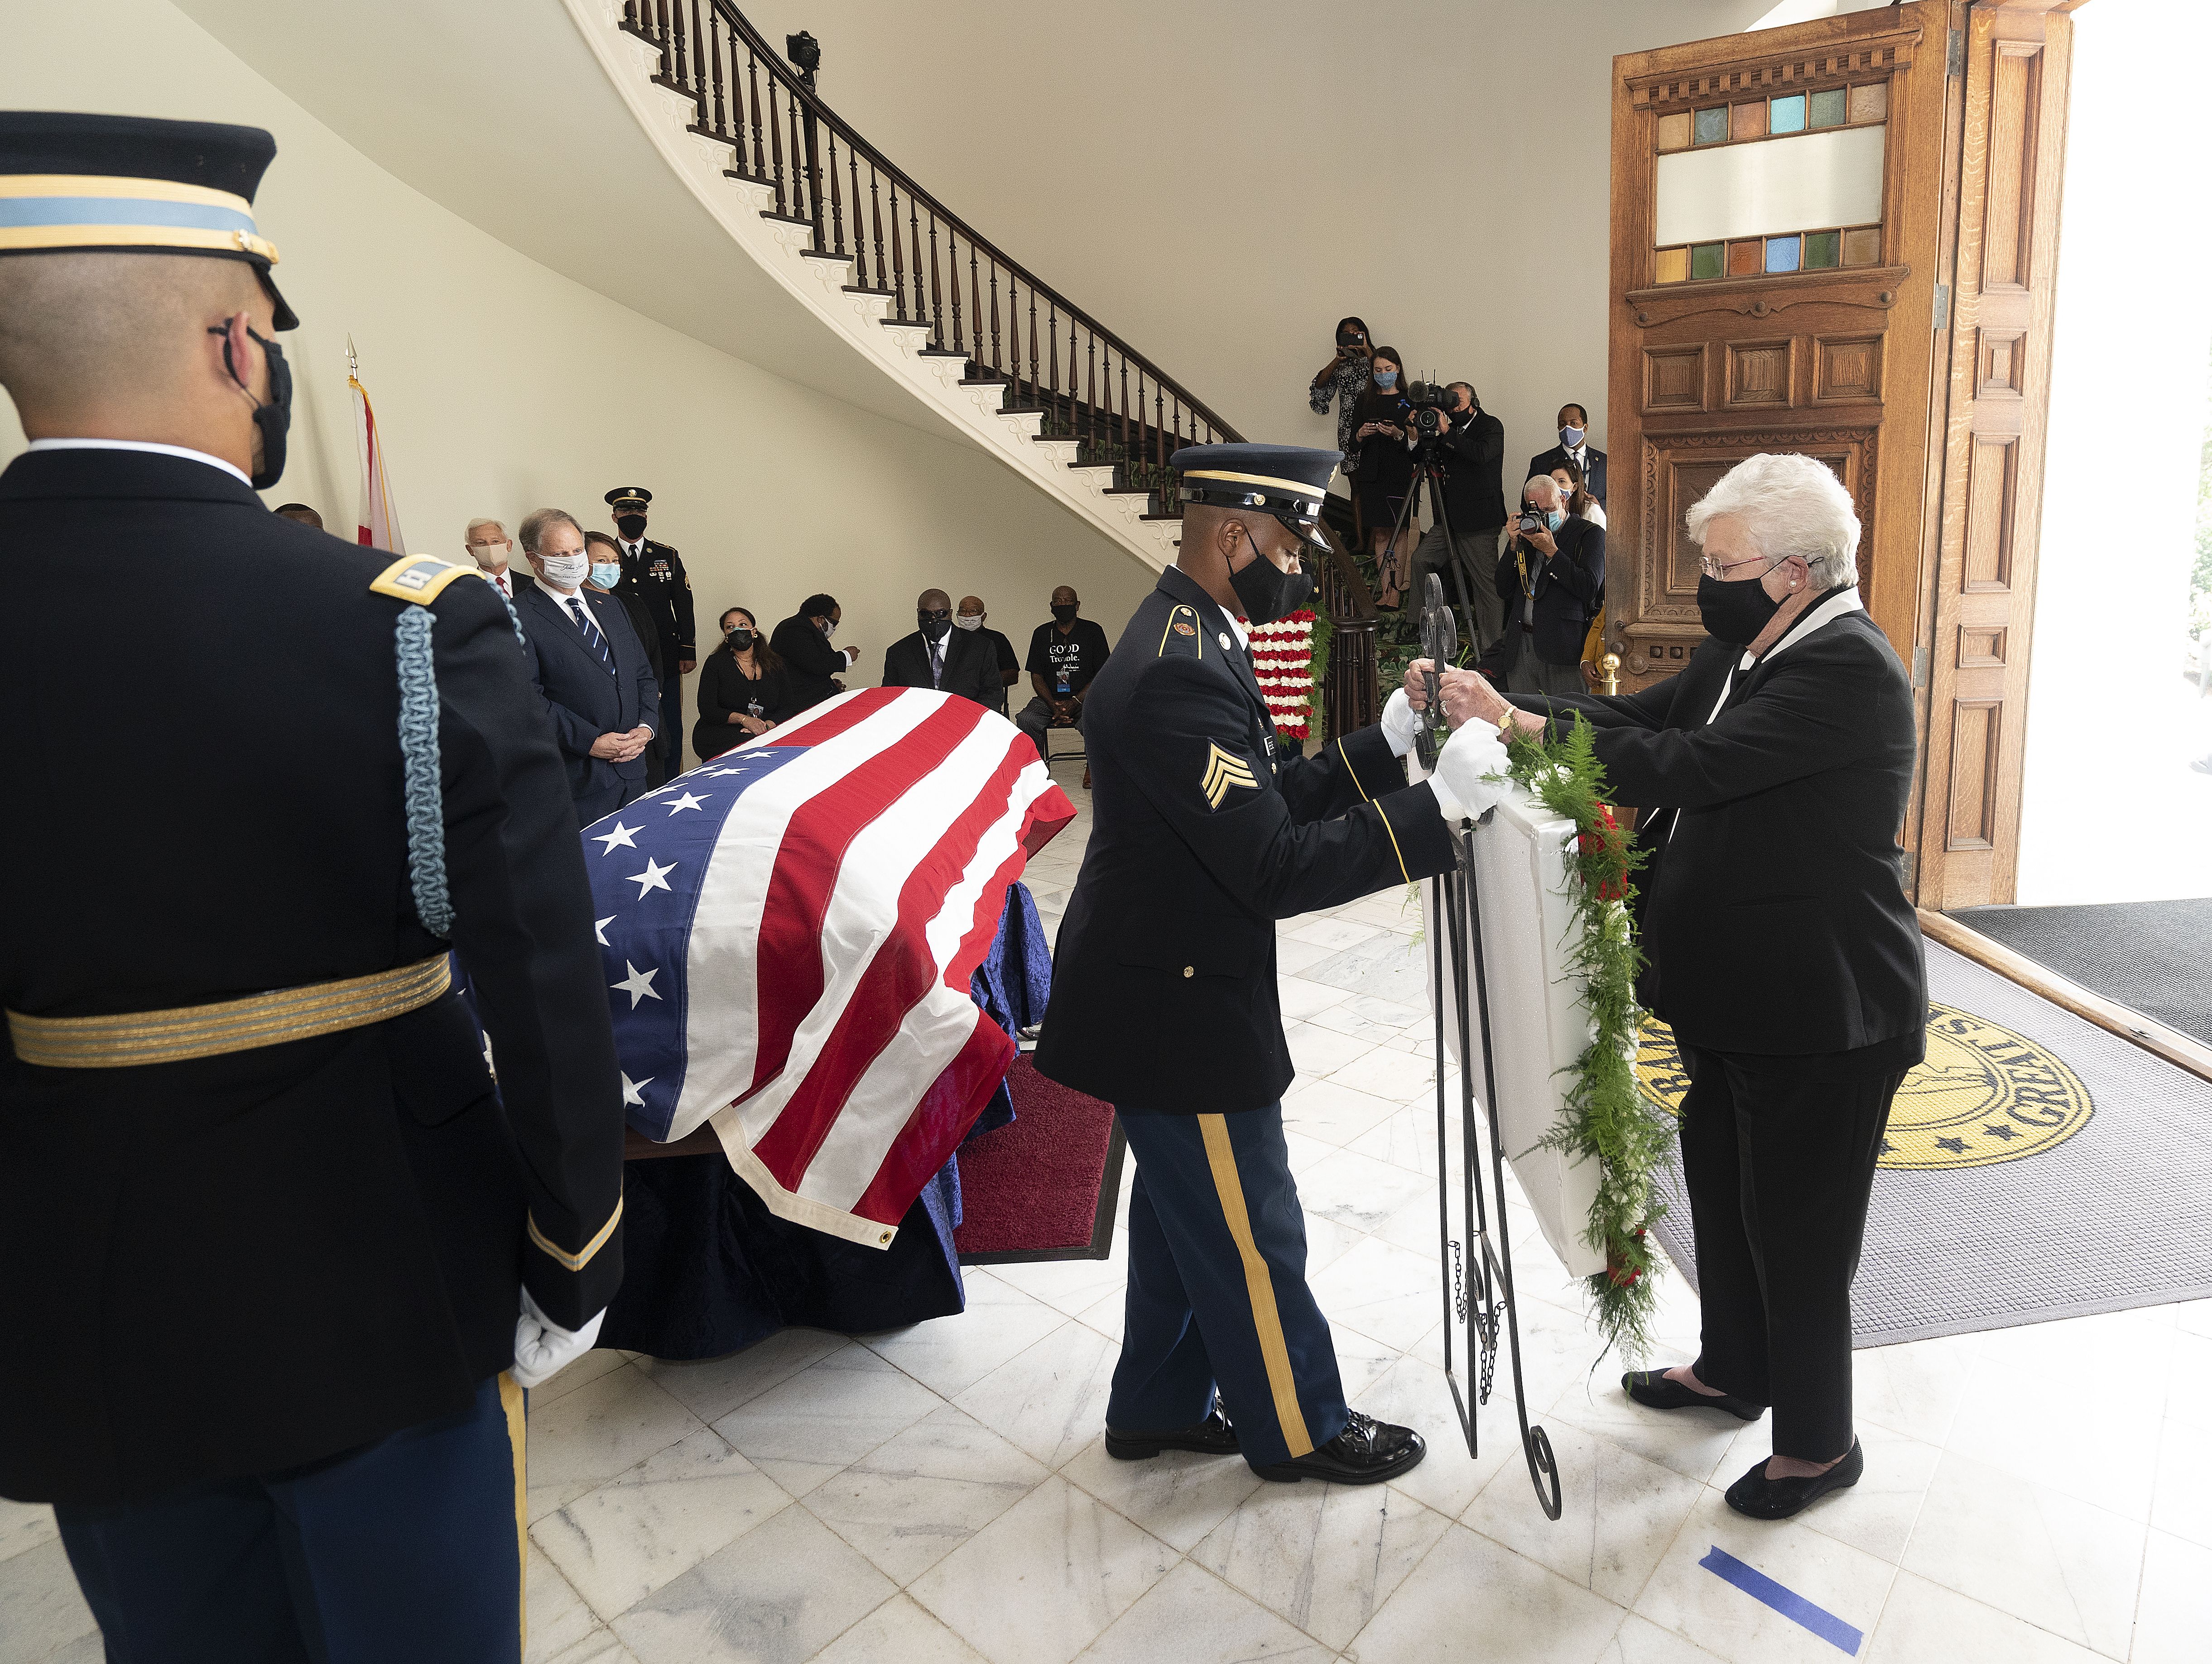  Gov. Kay Ivey places a wreath at the casket bearing the remains of John Lewis (D-GA) in the state Capitol building where he will lie in state on July 26, 2020 in Montgomery, Alabama. 